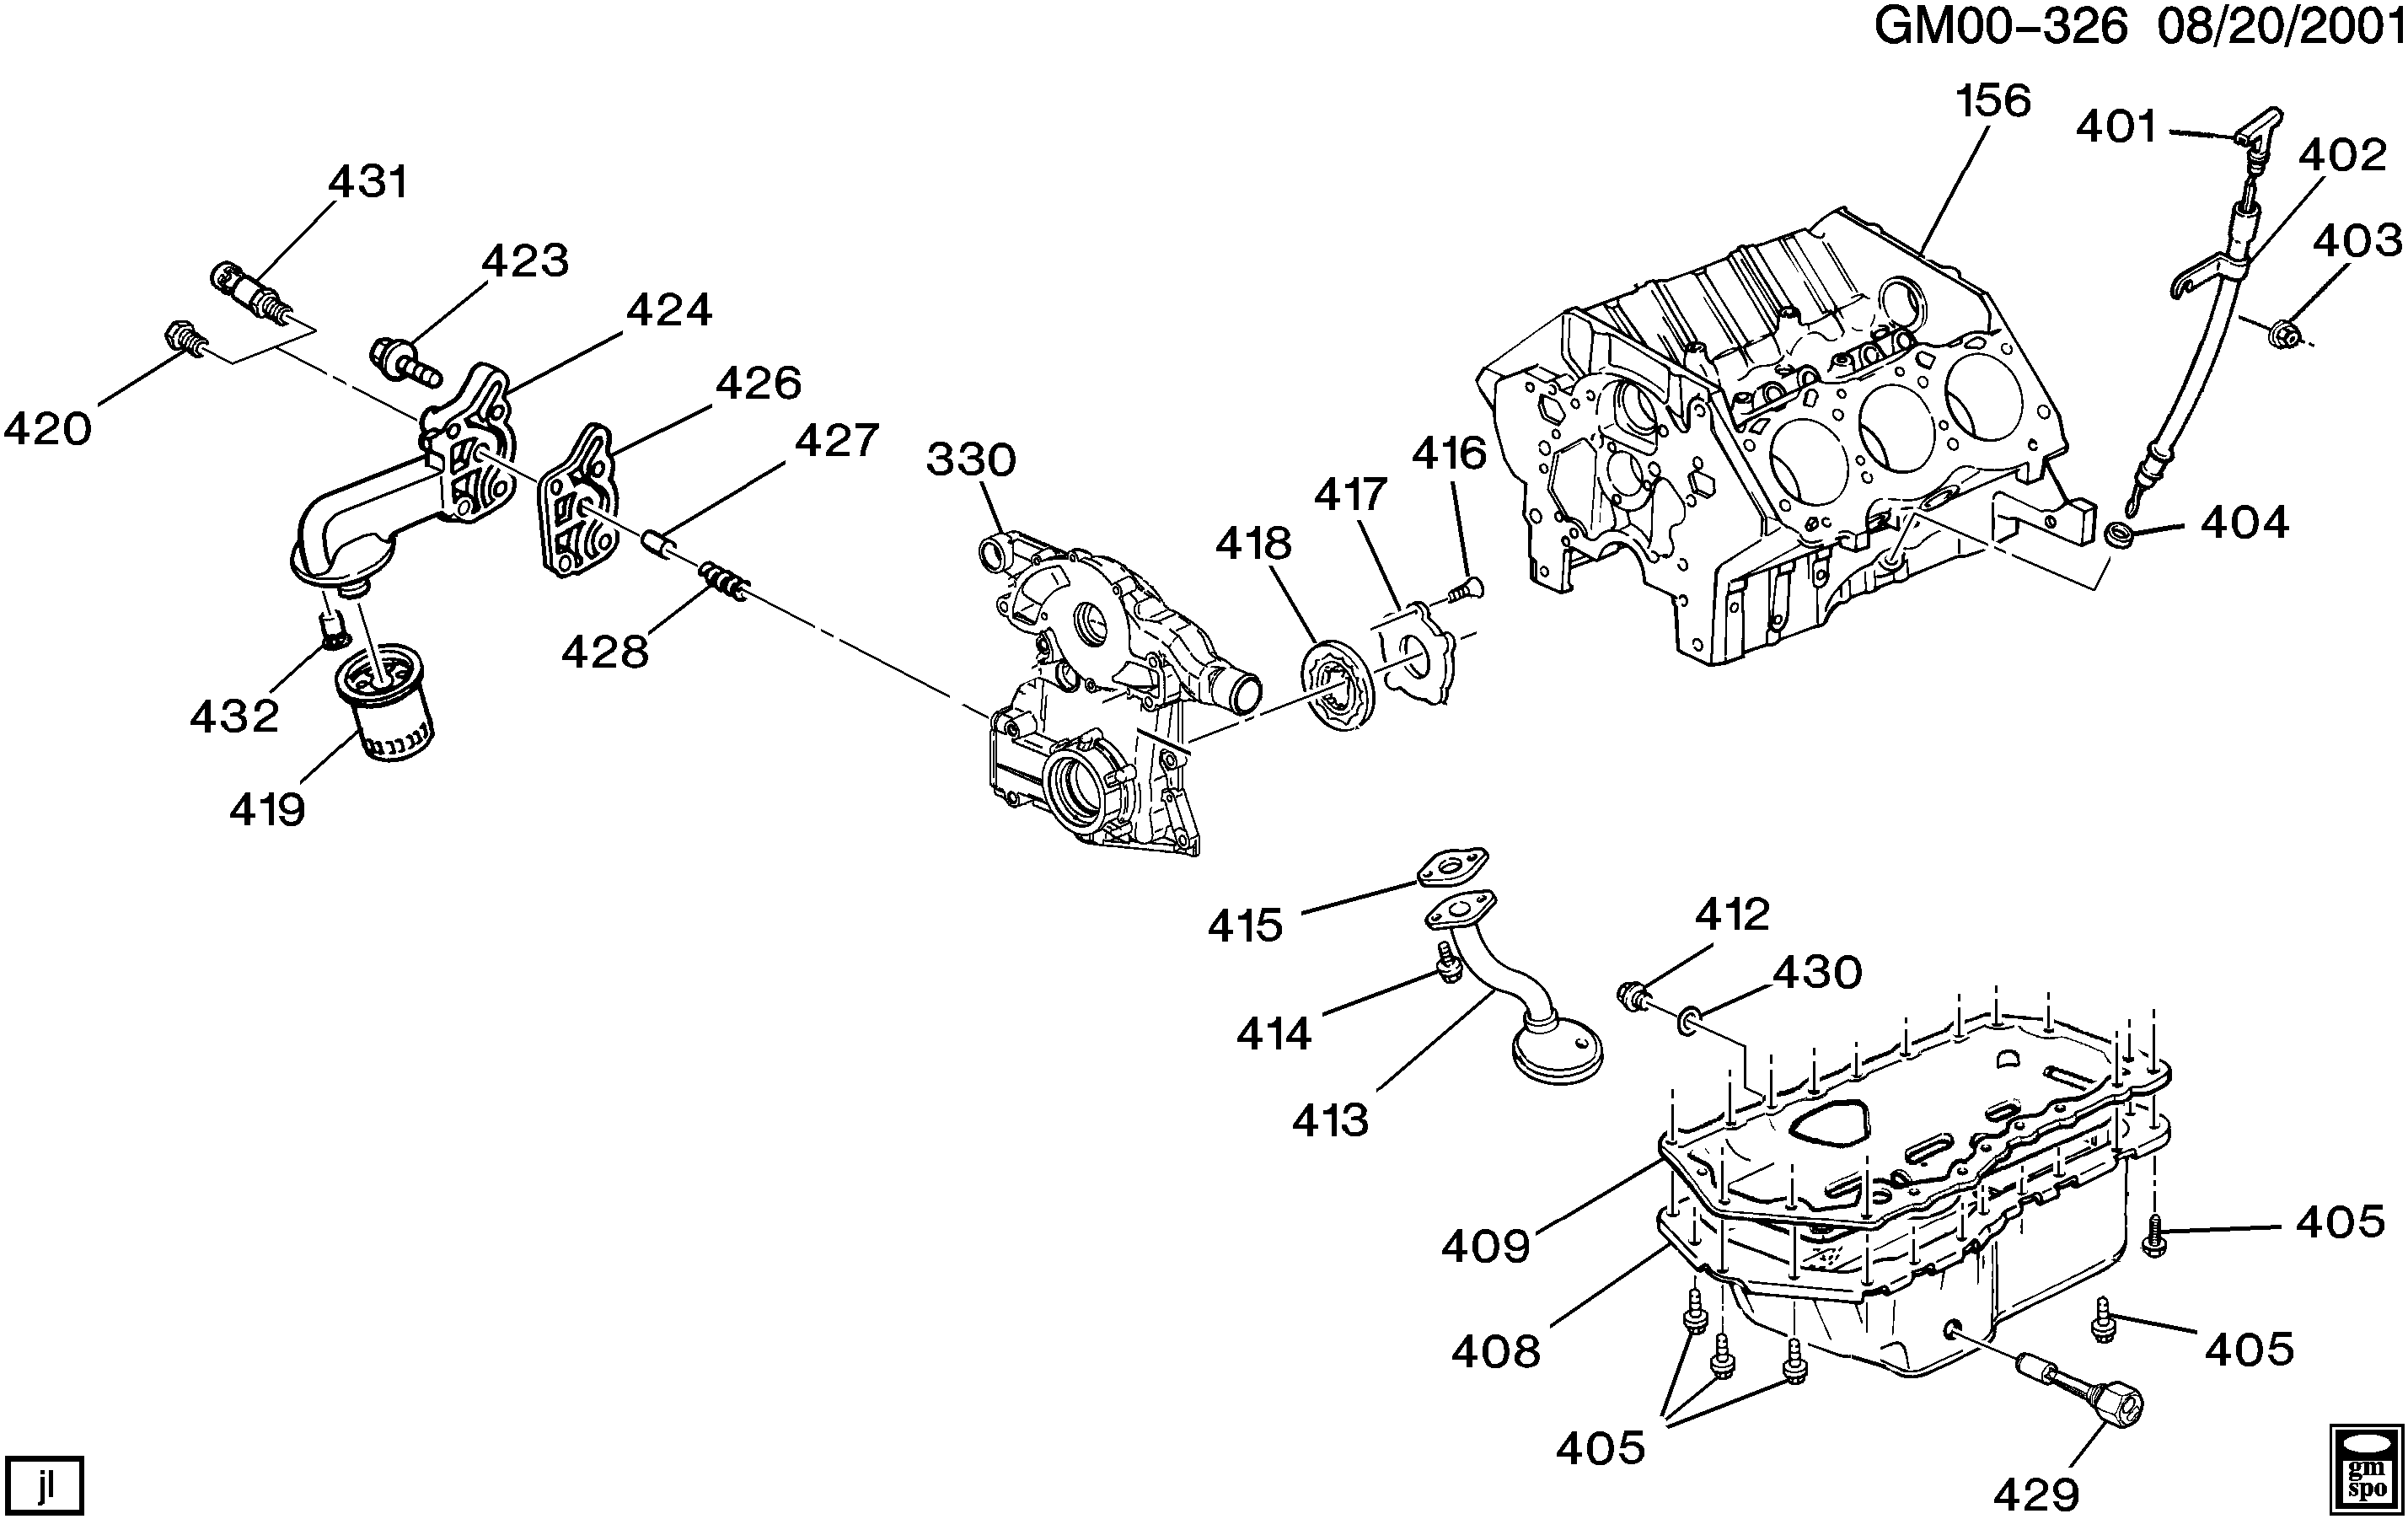 1997-2003 W ENGINE ASM-3.8L V6 PART 4 OIL PUMP,PAN AND RELATED PARTS (L36/3.8K)